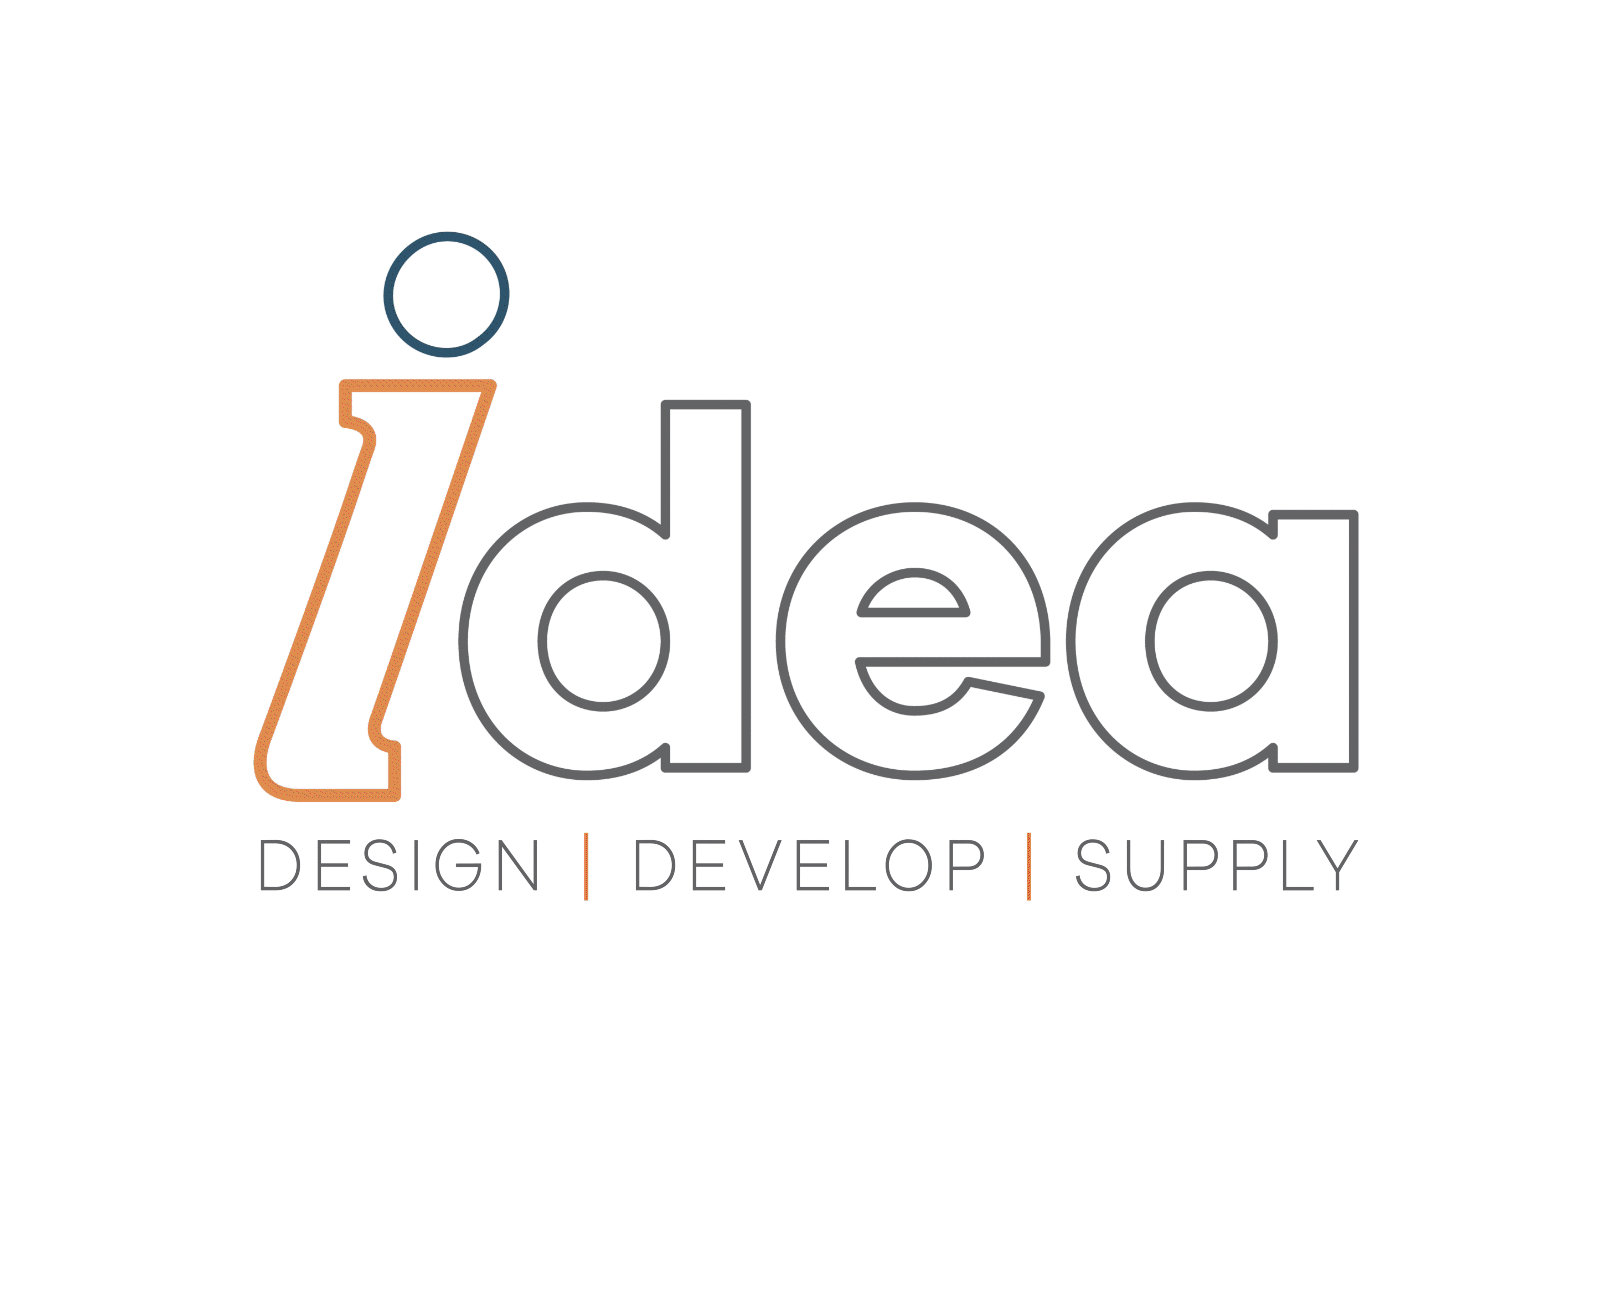 Celebrating 25 years of Creating Products from Ideas